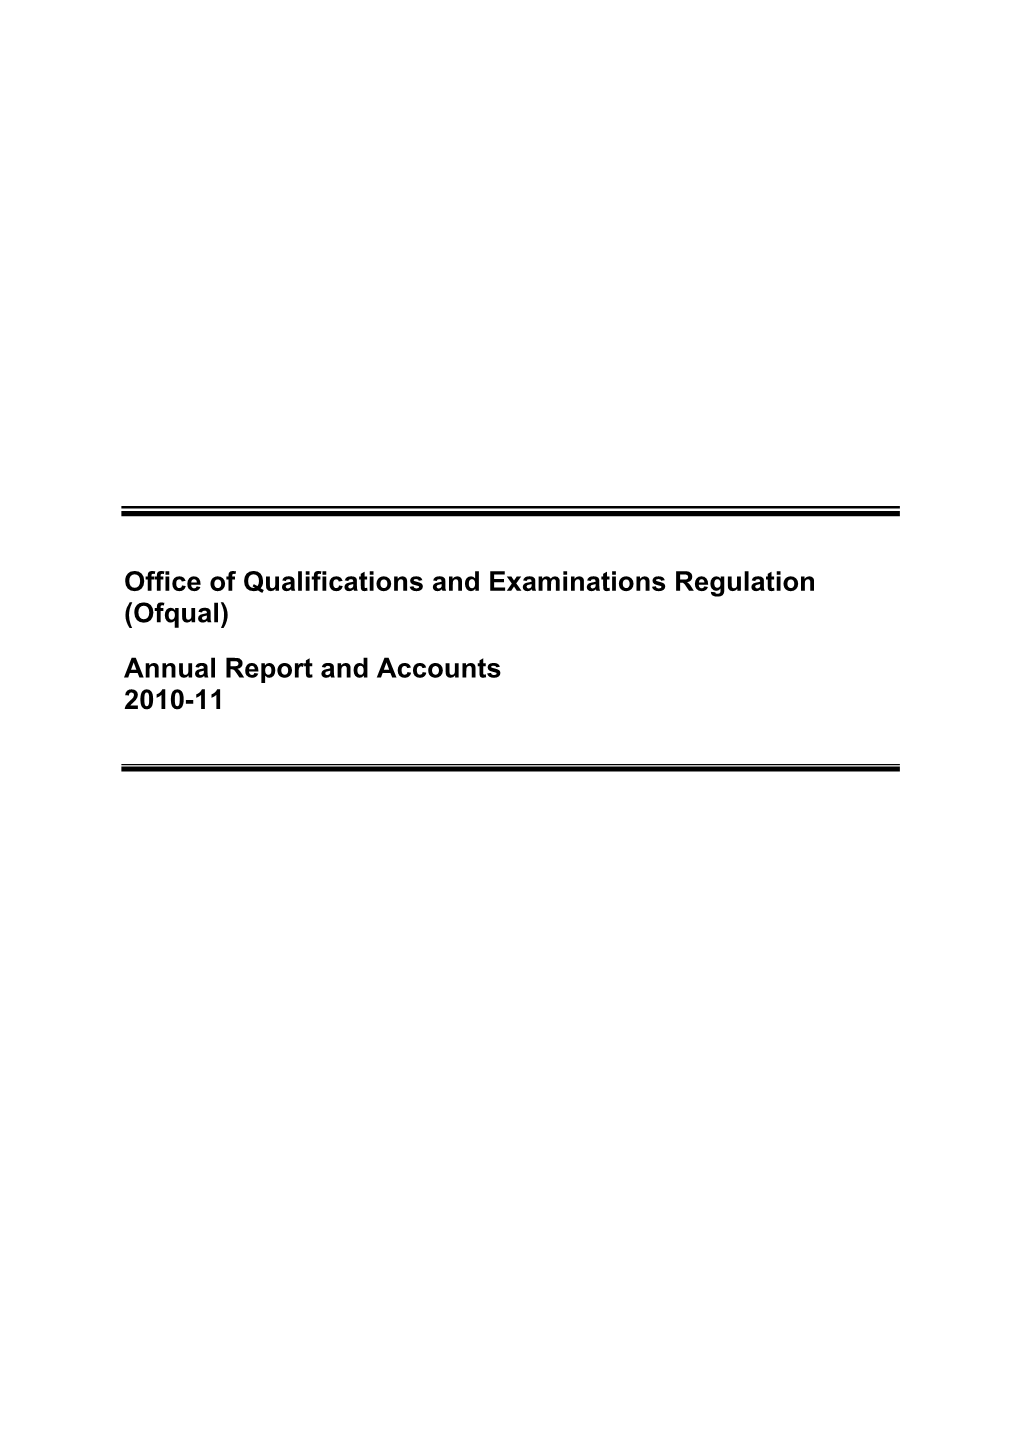 Office of Qualifications and Examinations Regulation (Ofqual)